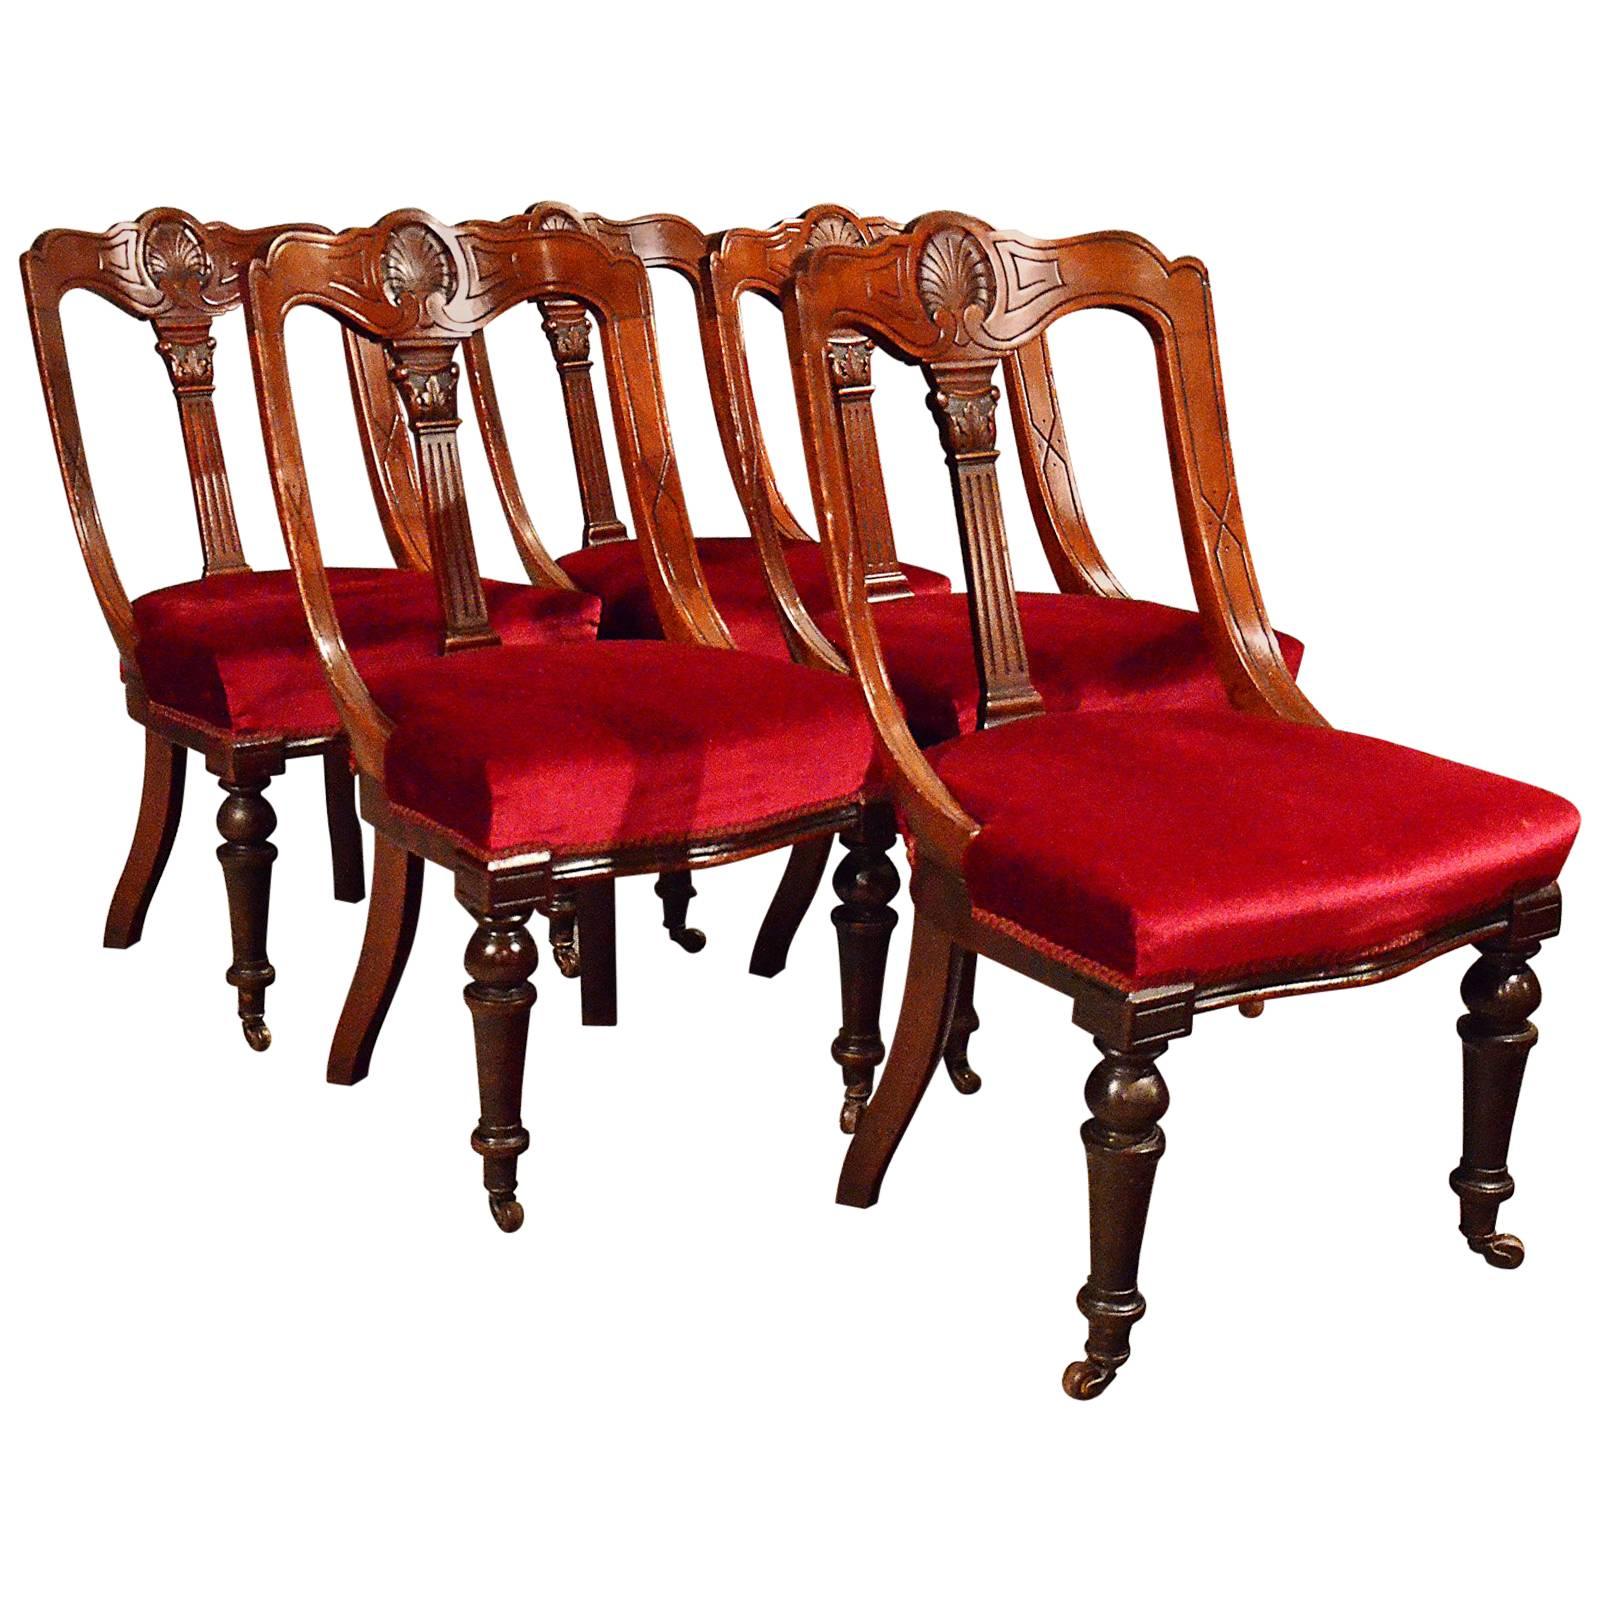 Antique Dining Chairs Set of Five Quality Mahogany Victorian Aesthetic Period